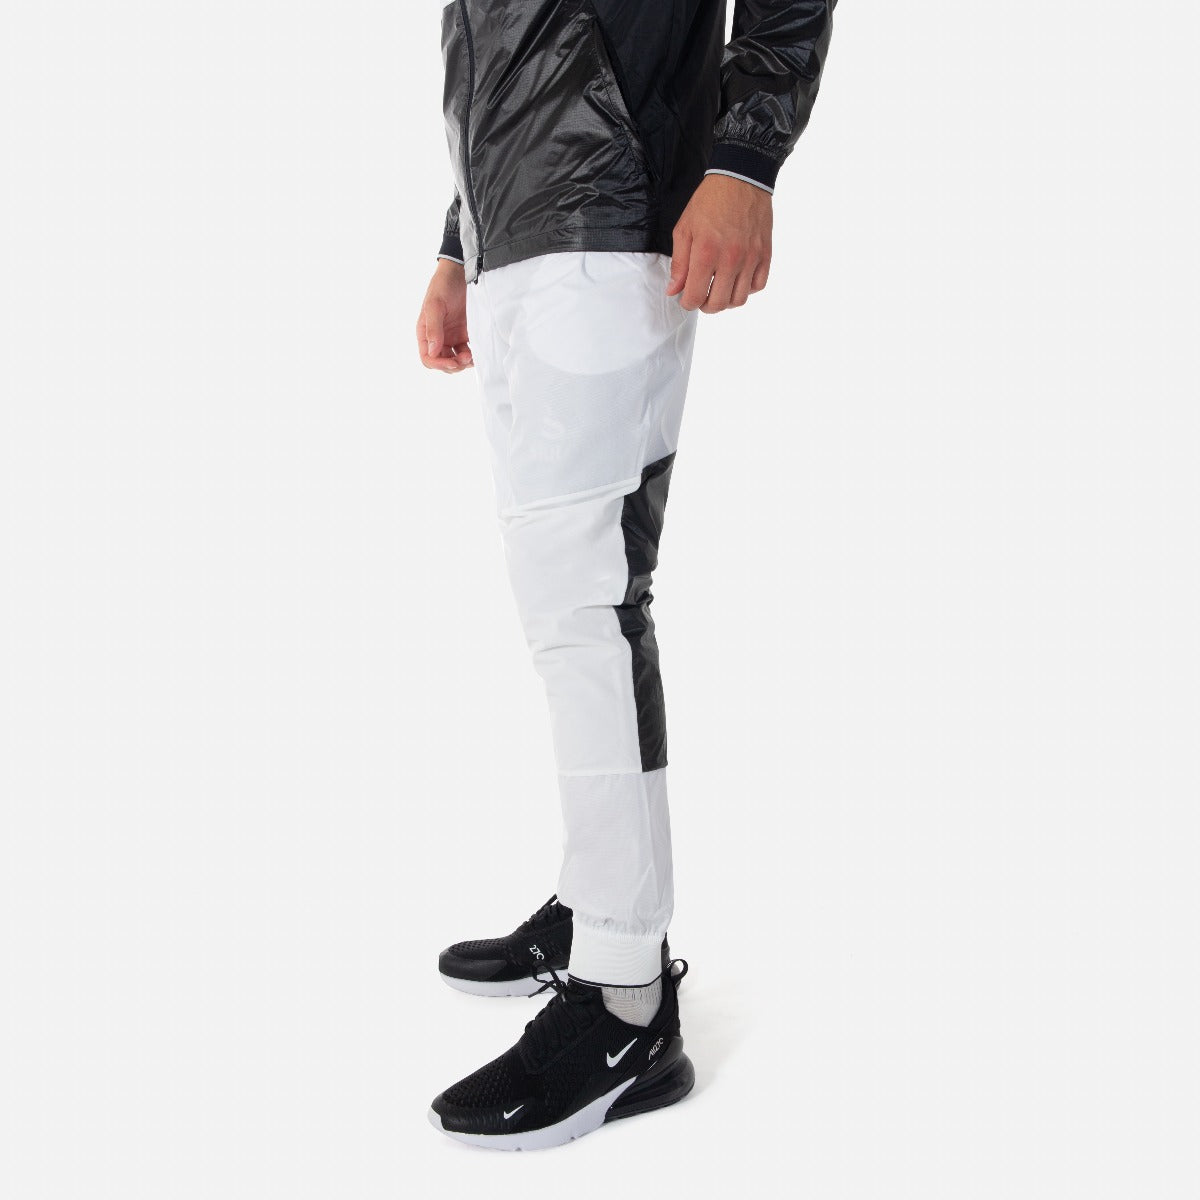 Under Armor Recover Pants - White/Black